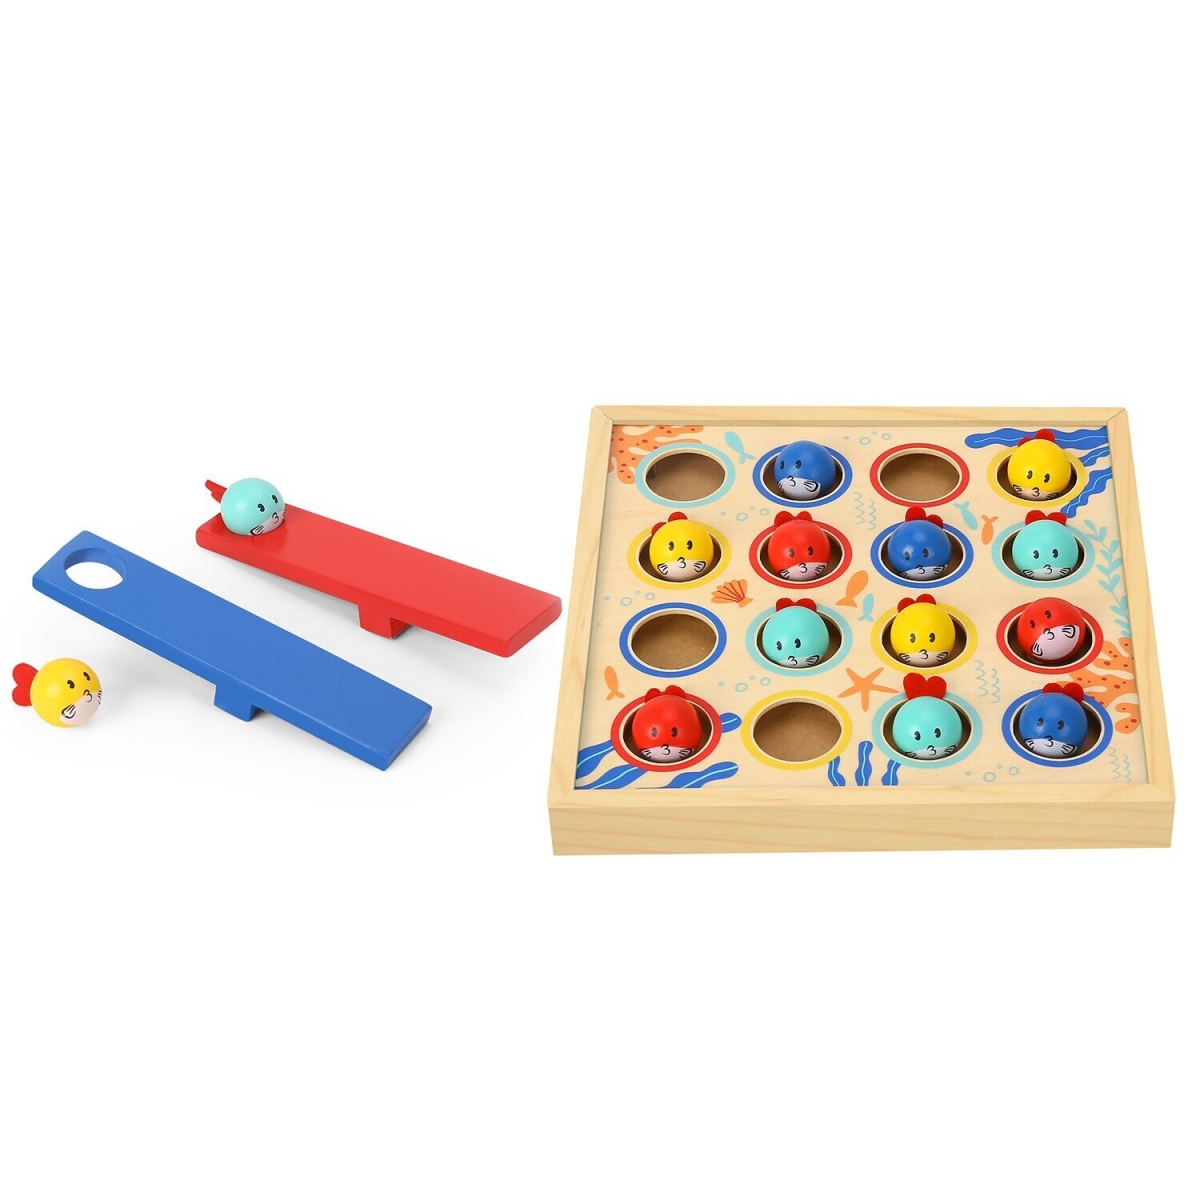 Picture of Tooky Toy 300271 22 x 22 x 3 cm Small Fish Diving Play Set